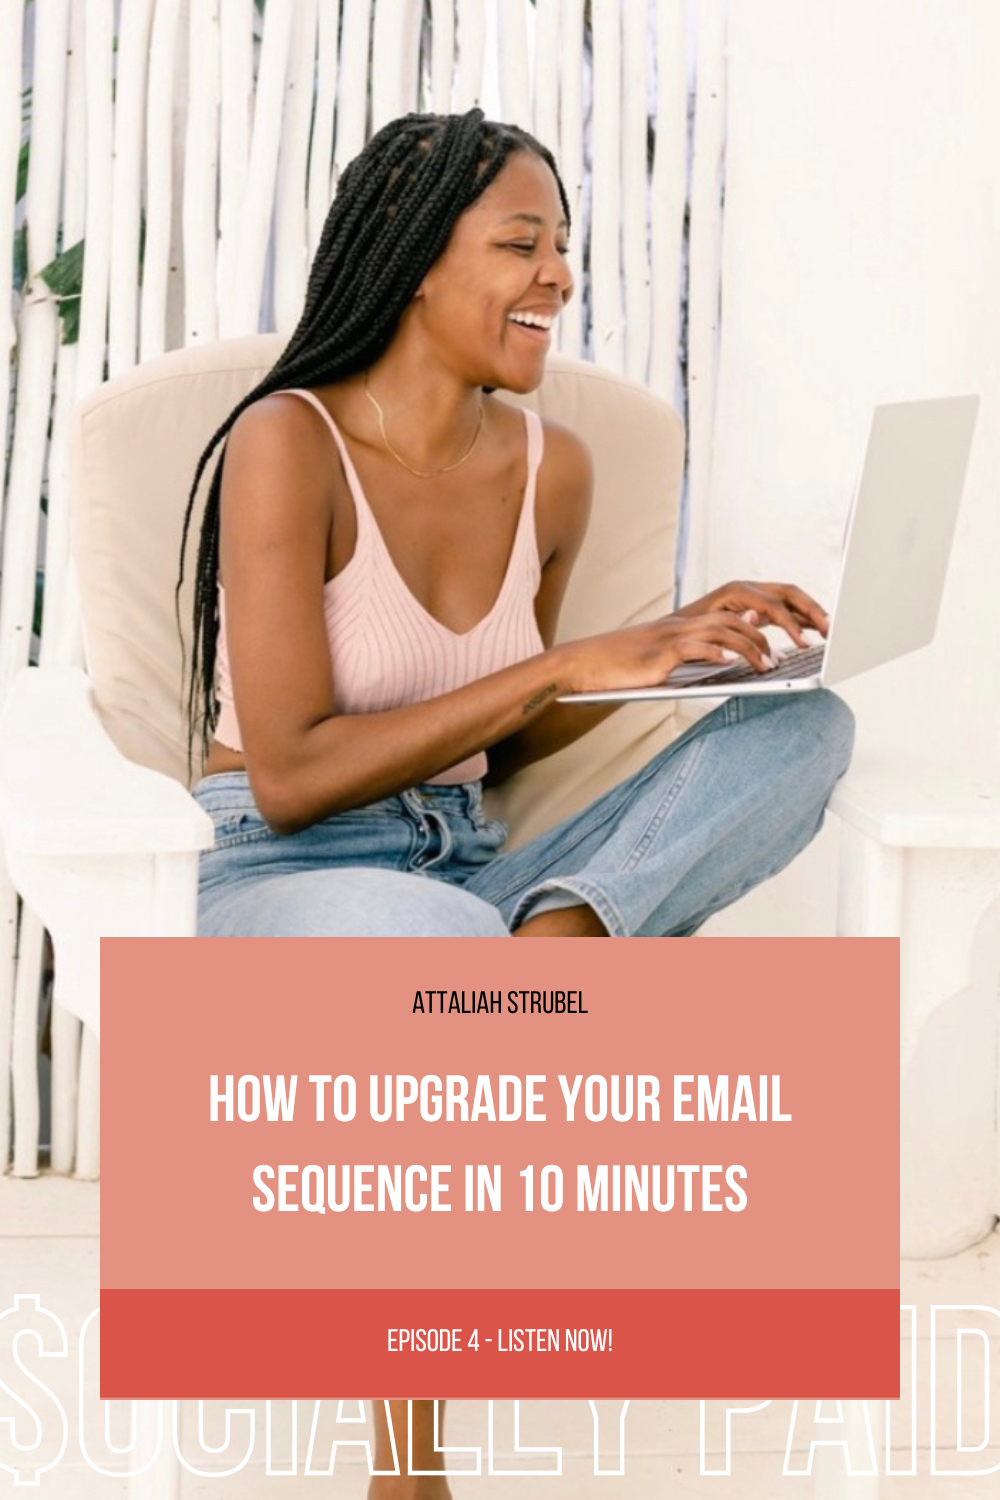 How to Upgrade Your Email Sequence in 10 Minutes